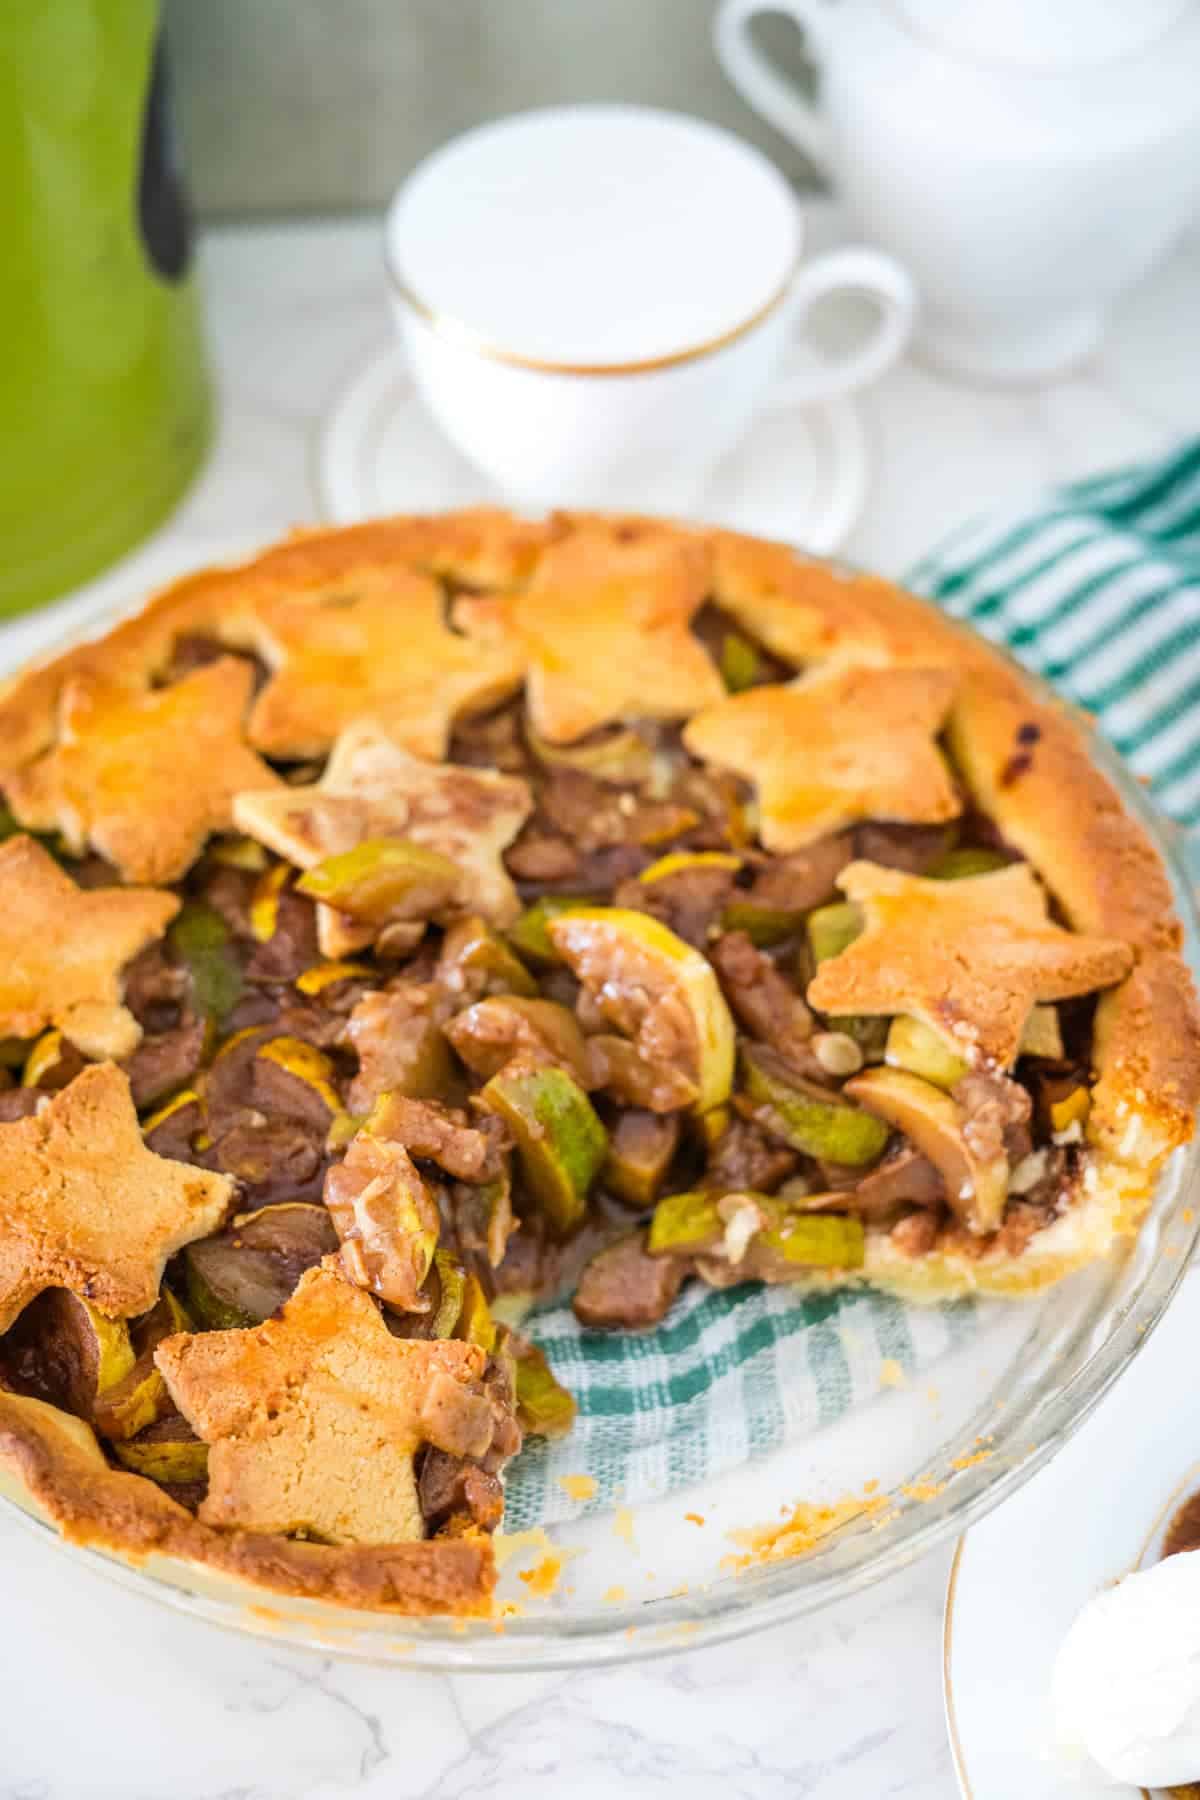 A savory pie with meat and vegetables on a plate.